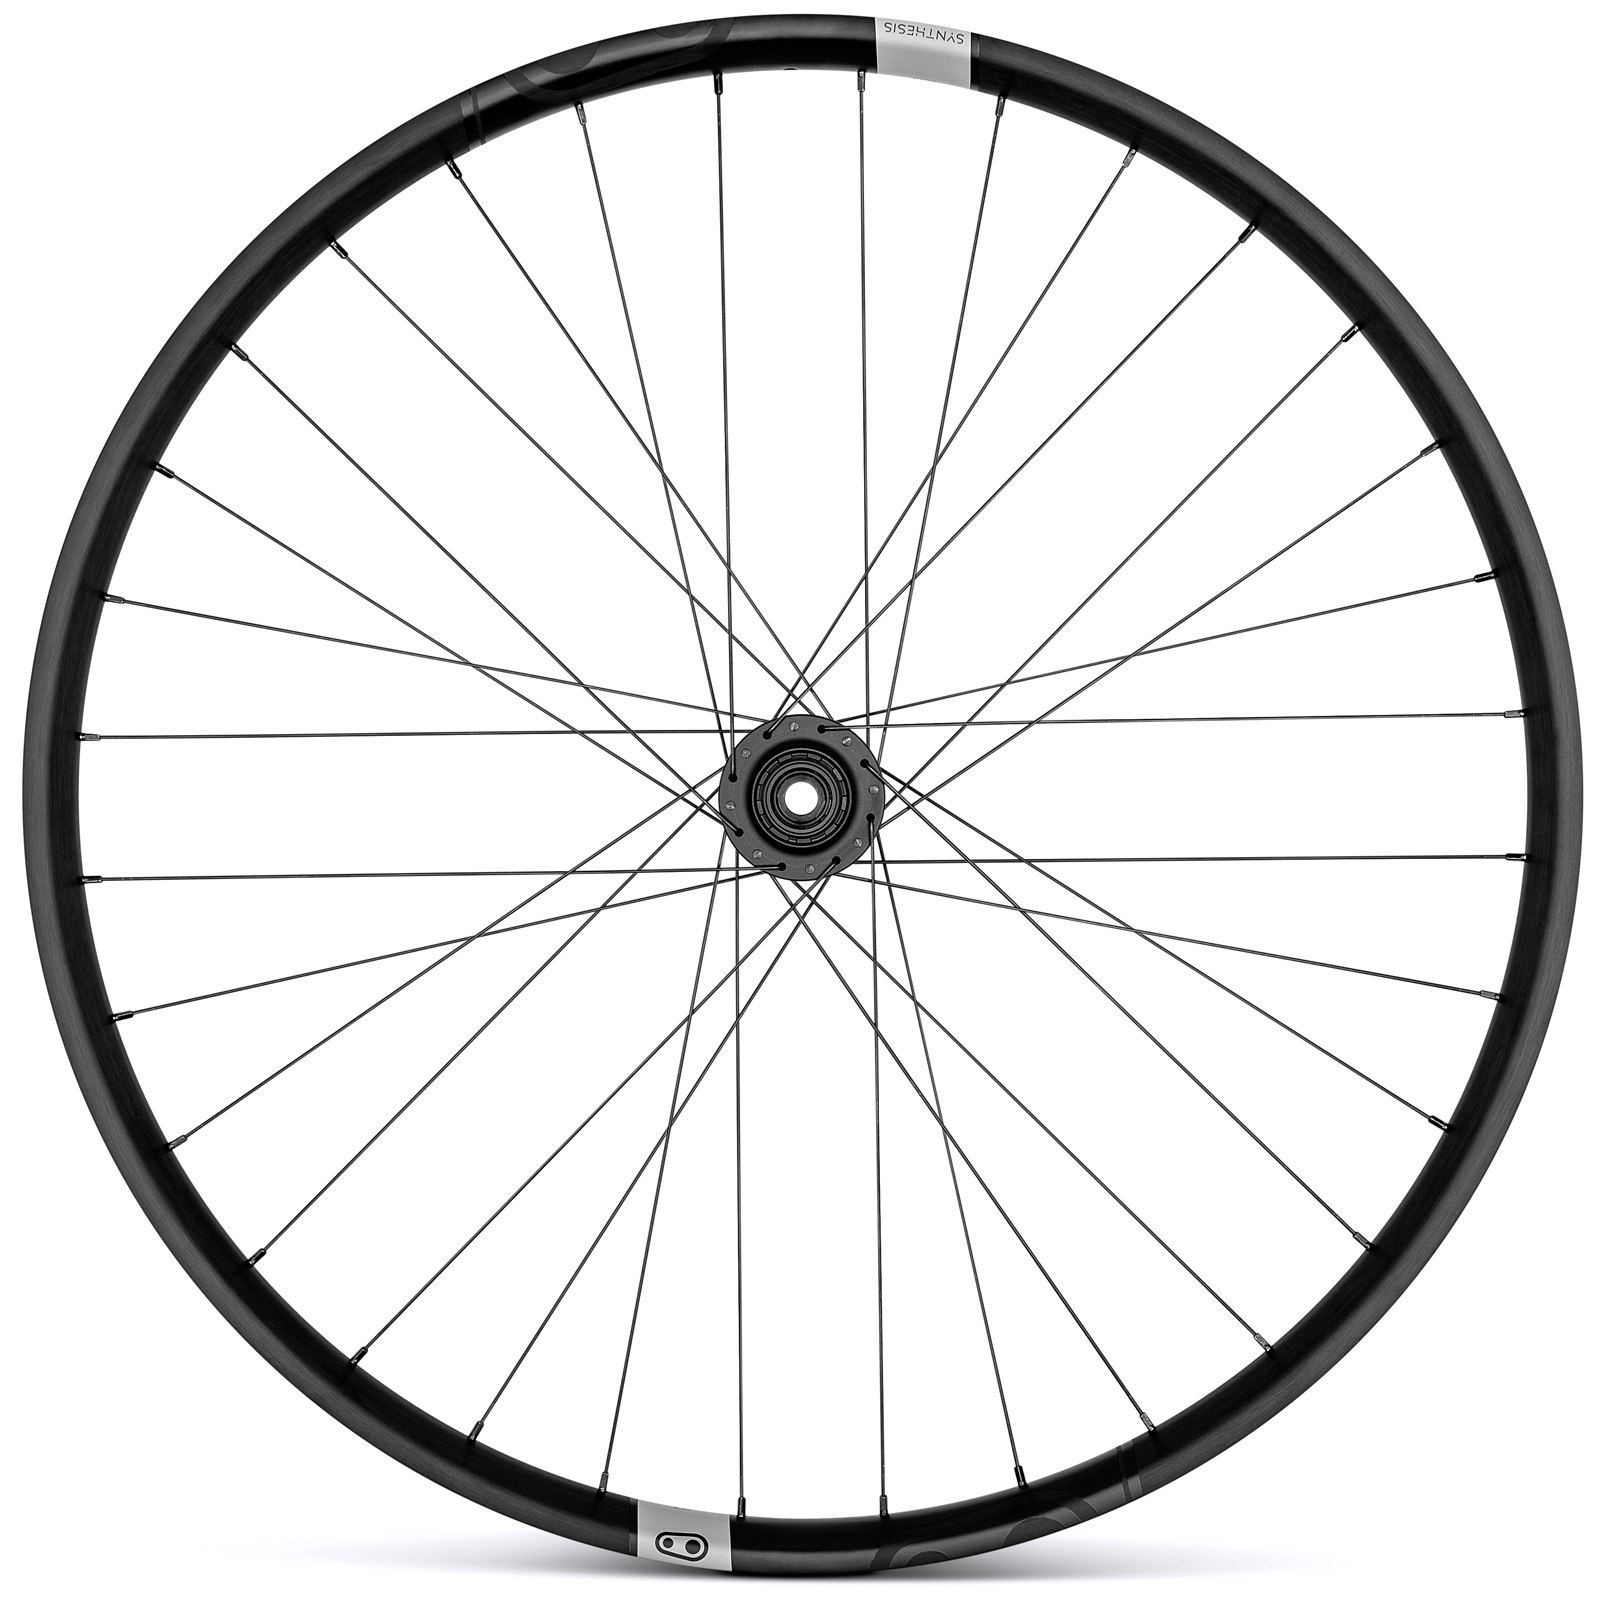 Picture of Crankbrothers Synthesis Enduro Alloy - 29 Inch Rear Wheel - 6-Bolt - SRAM XD - 12x148mm Boost